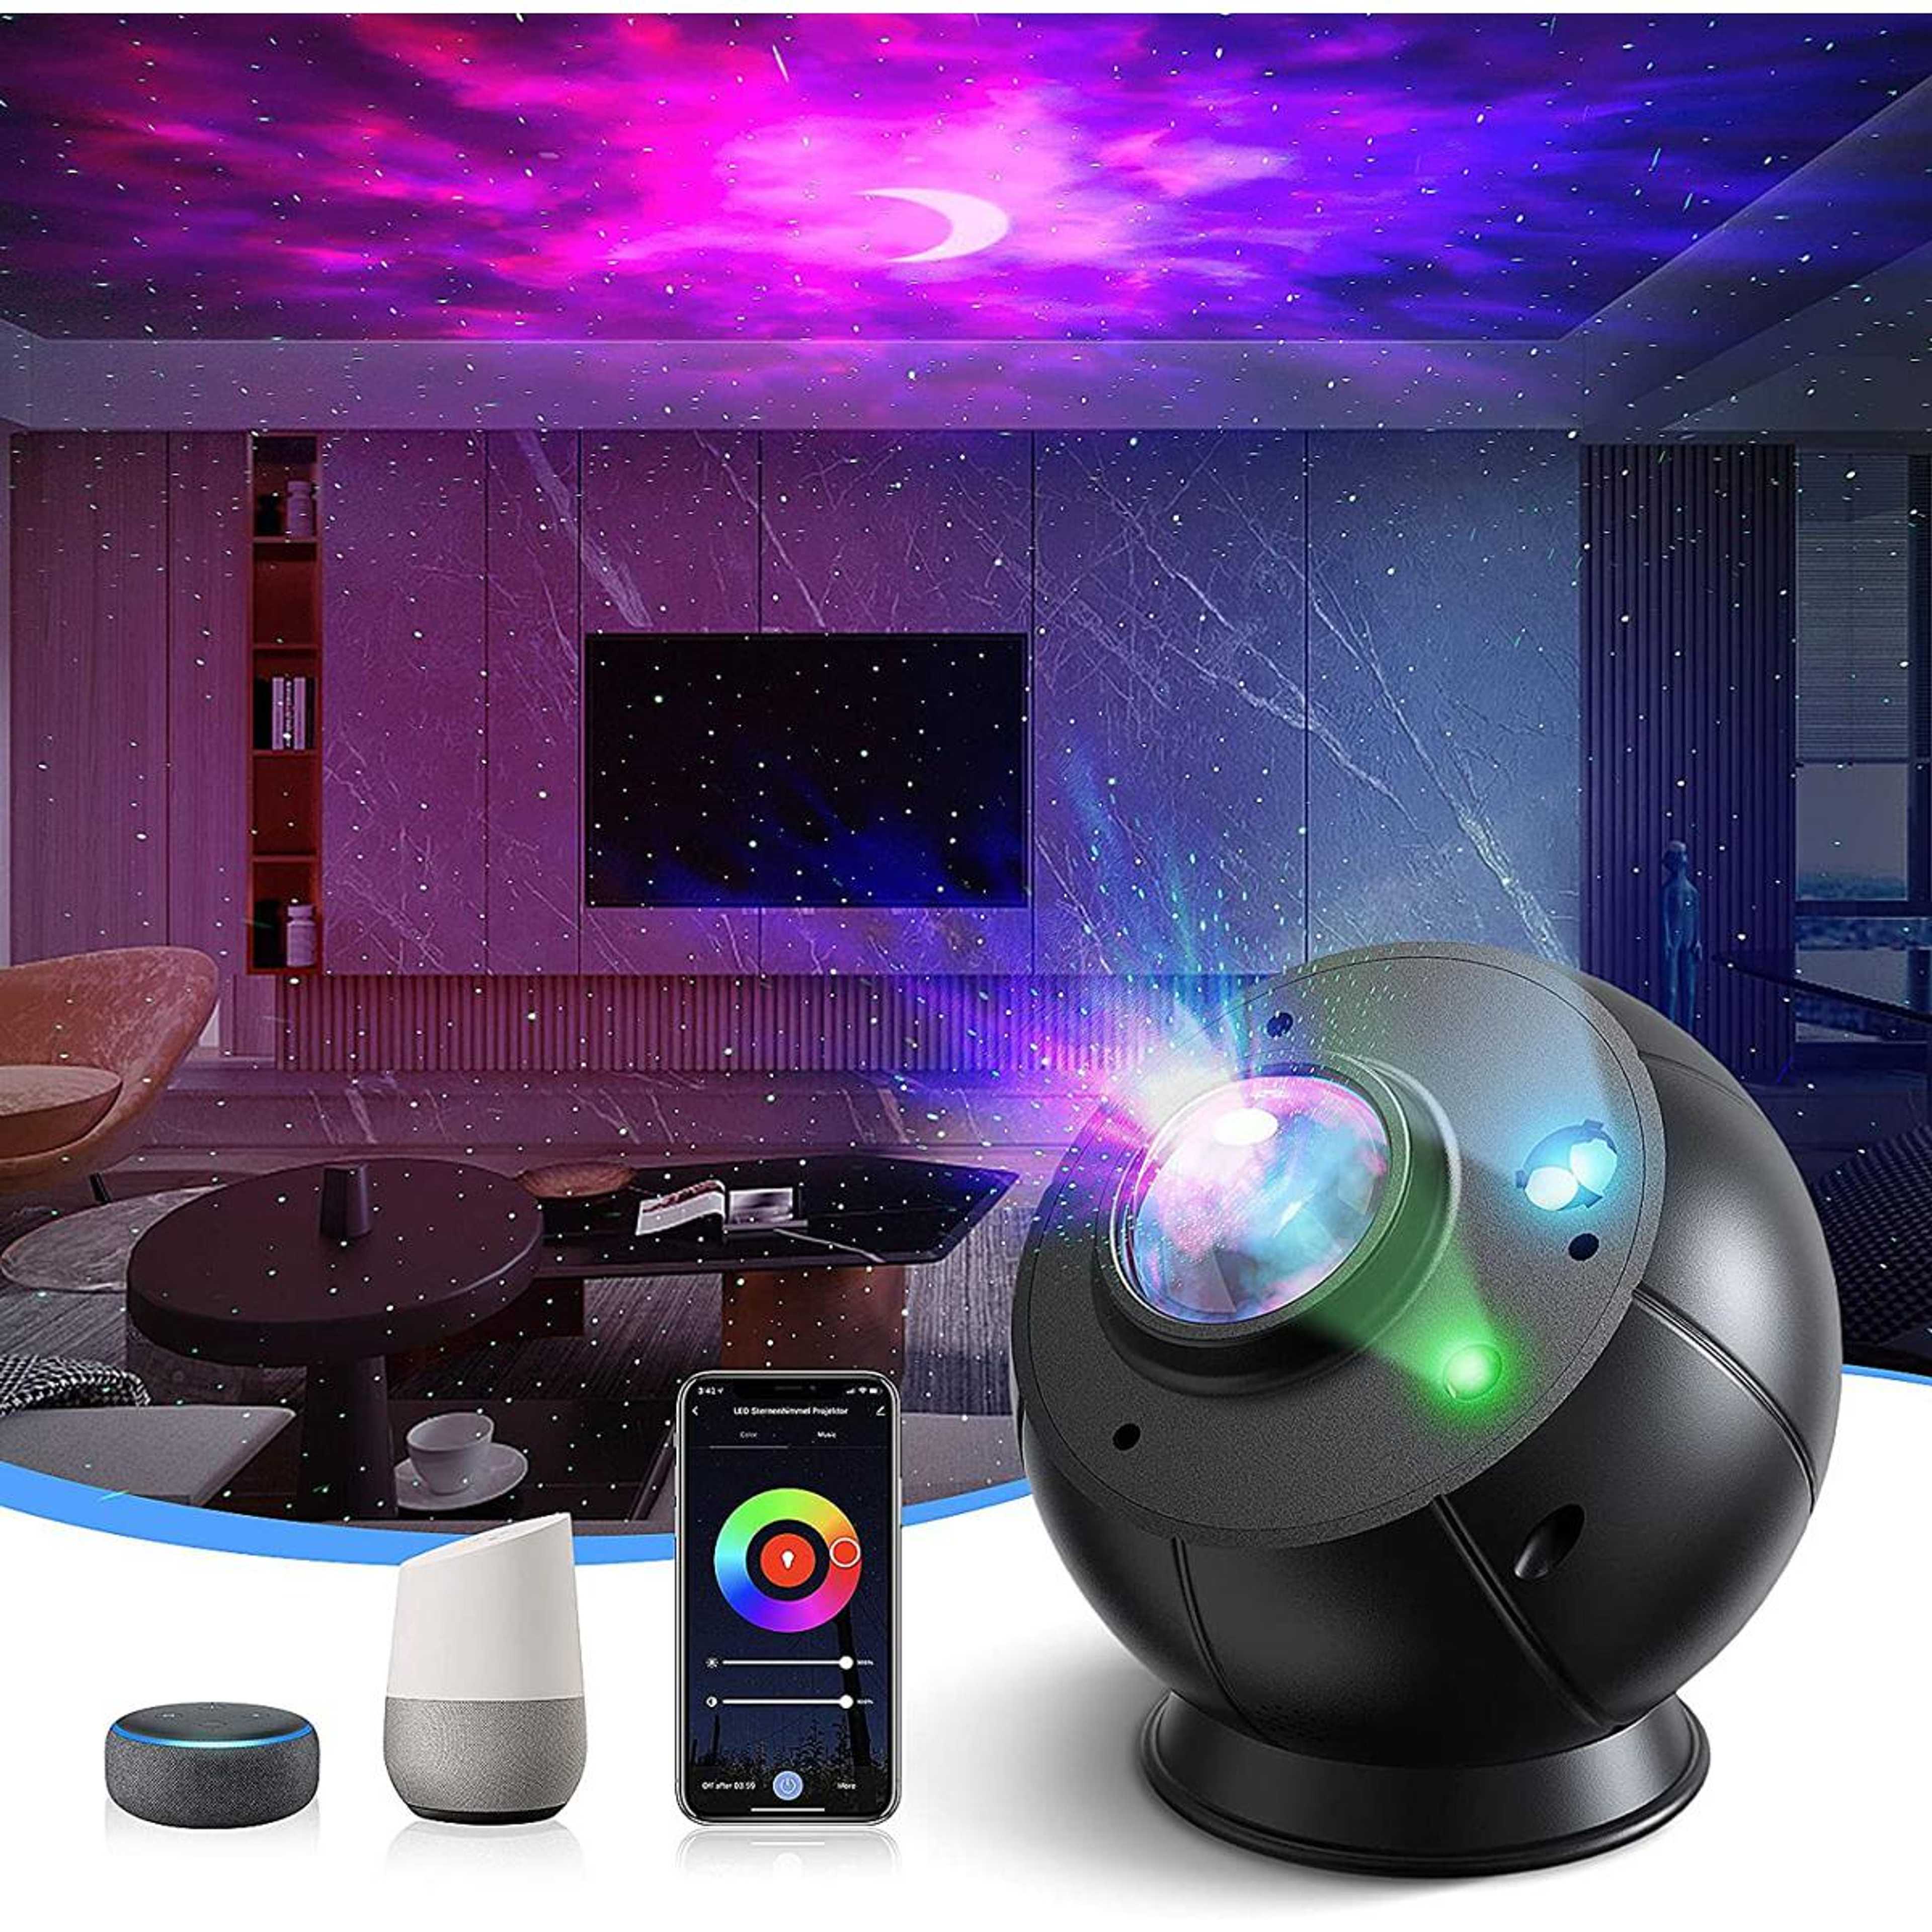 Basketball starry sky light galaxy projector   | WiFi ,remote control voice control | touch system